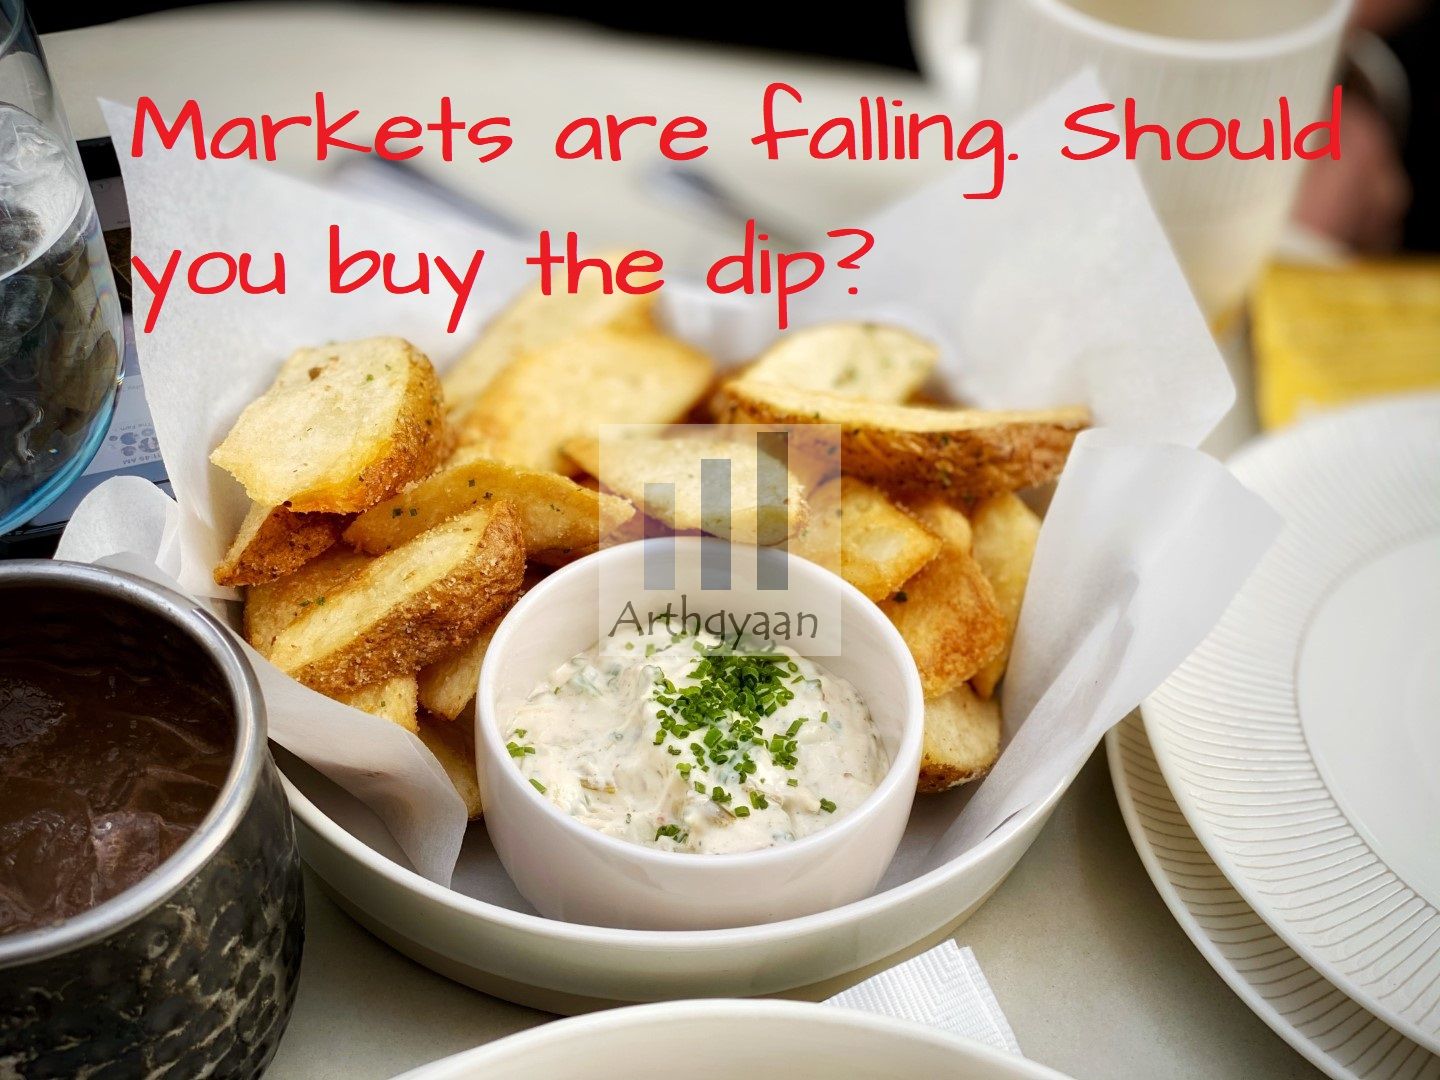 Markets are falling. Should you buy the dip?